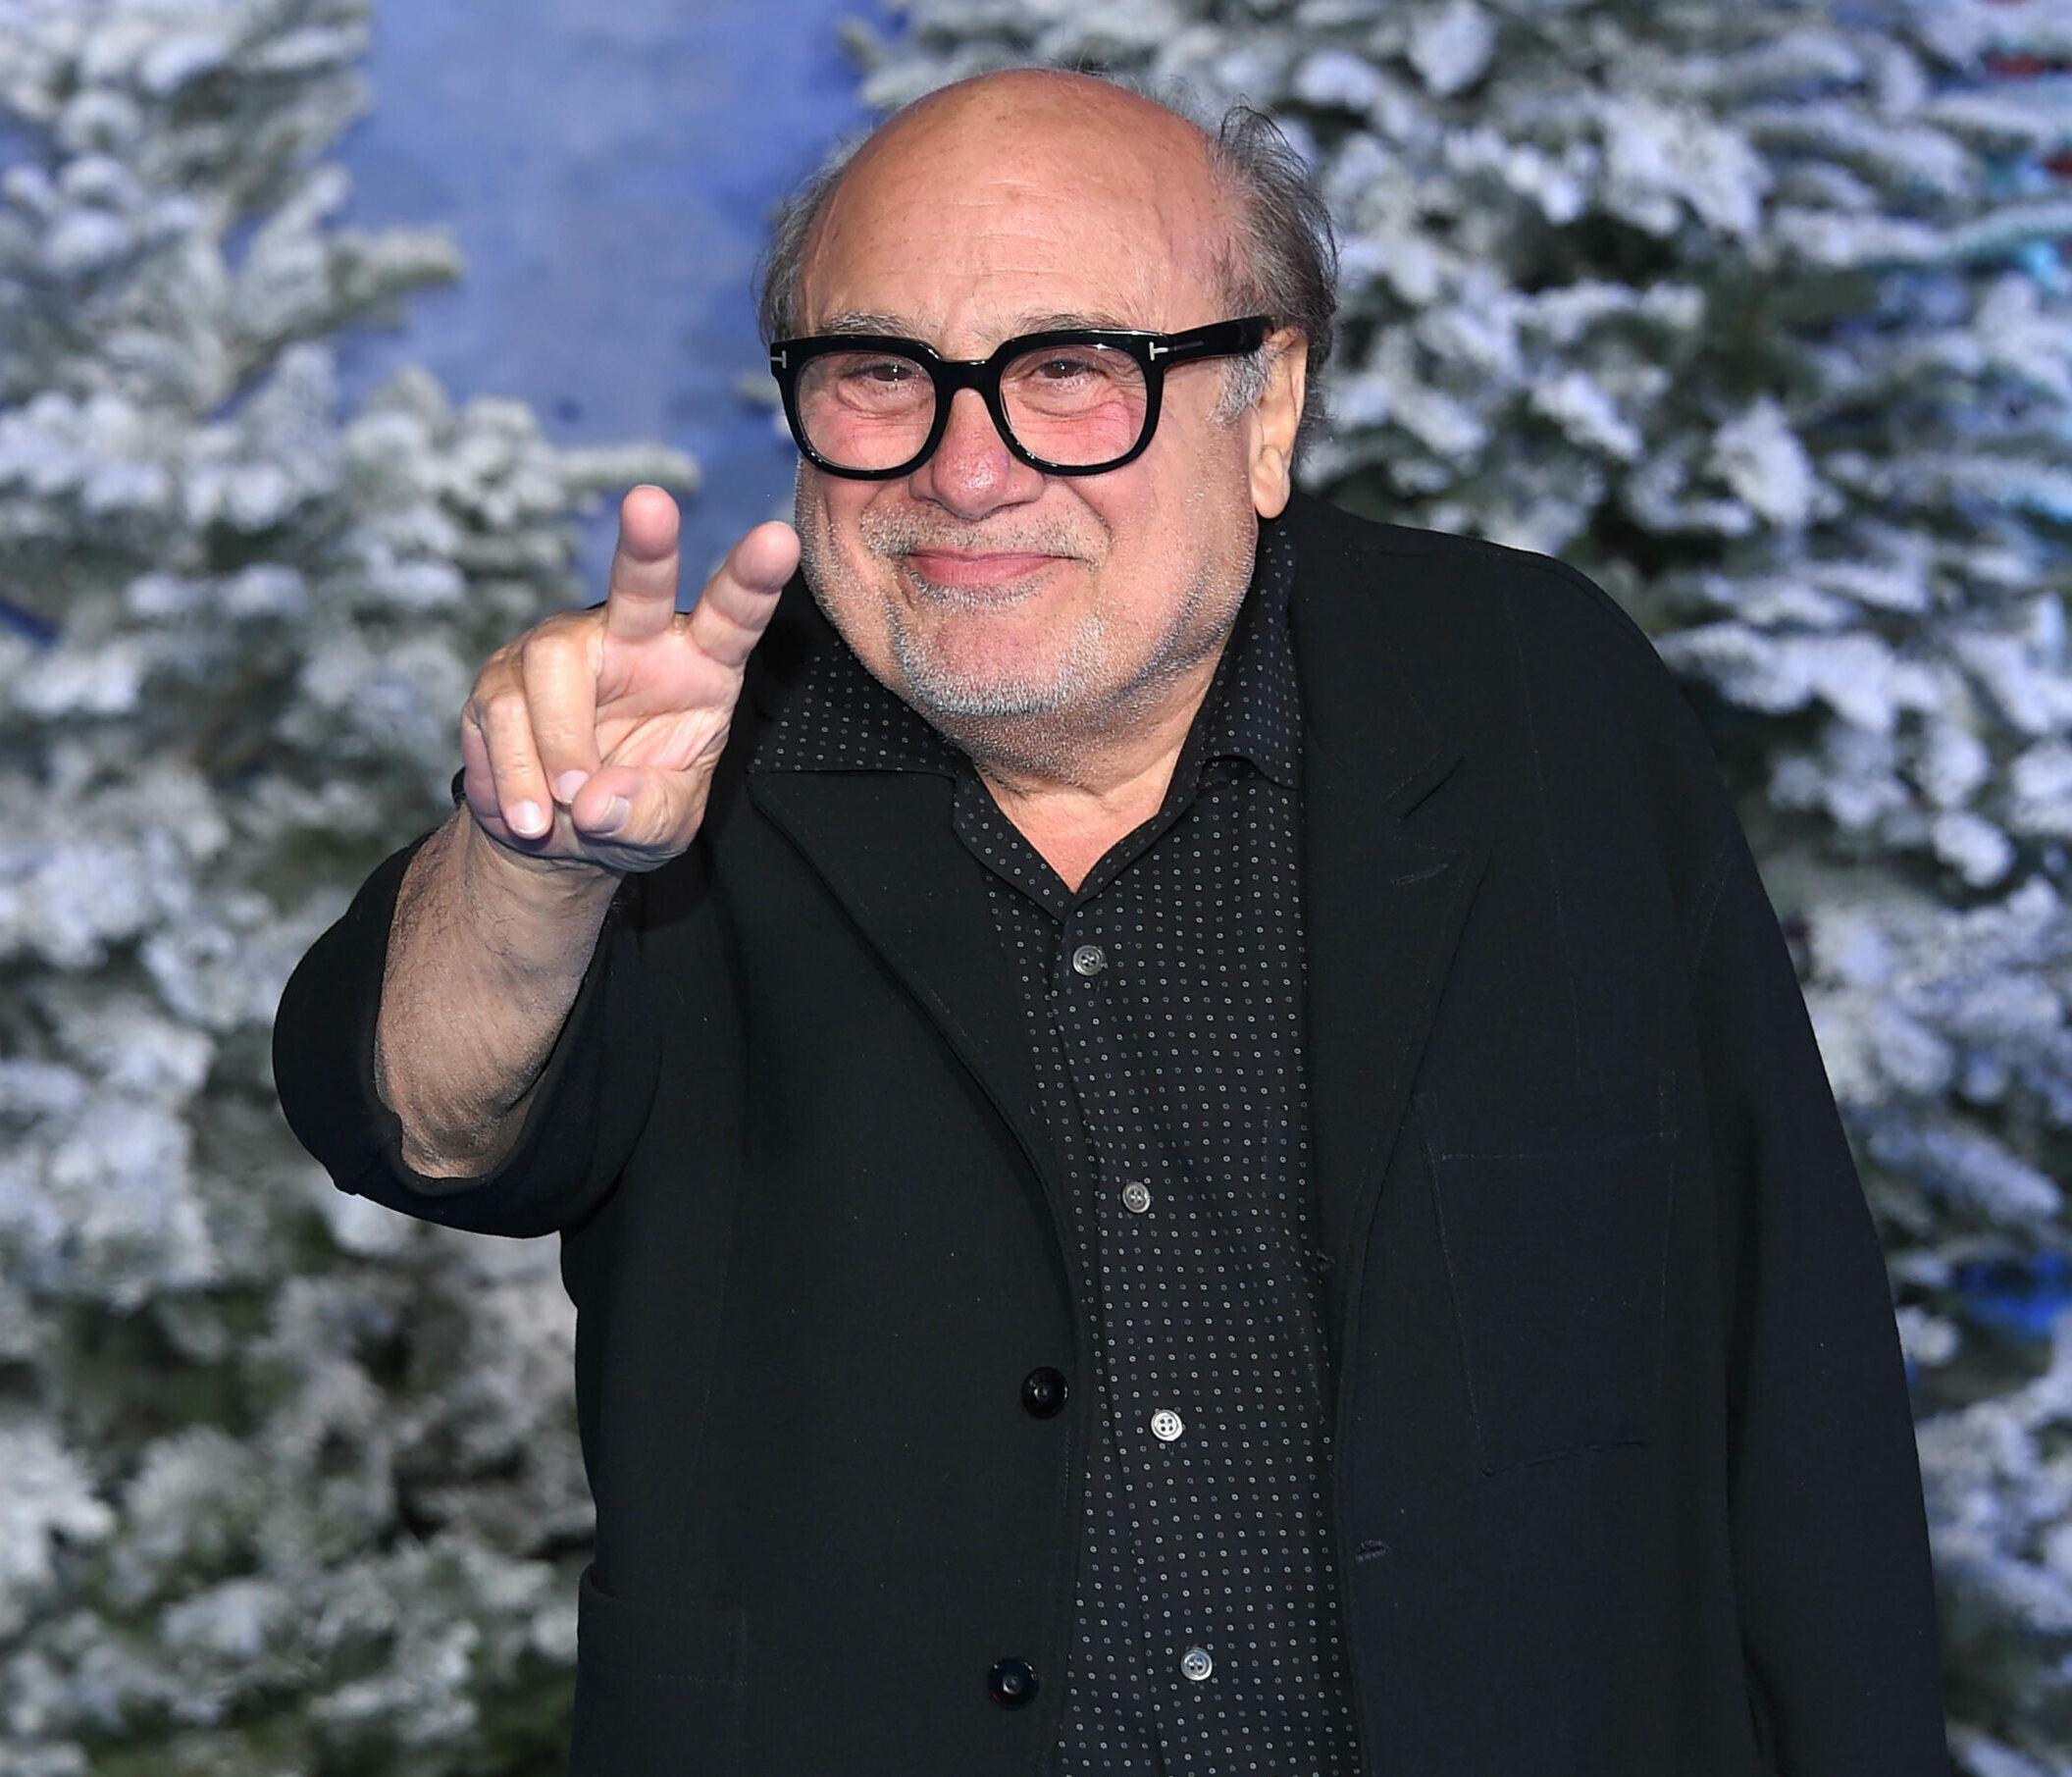 Danny DeVito at at the premiere of ?Jumanji: The Next Level? in Los Angeles, CA.